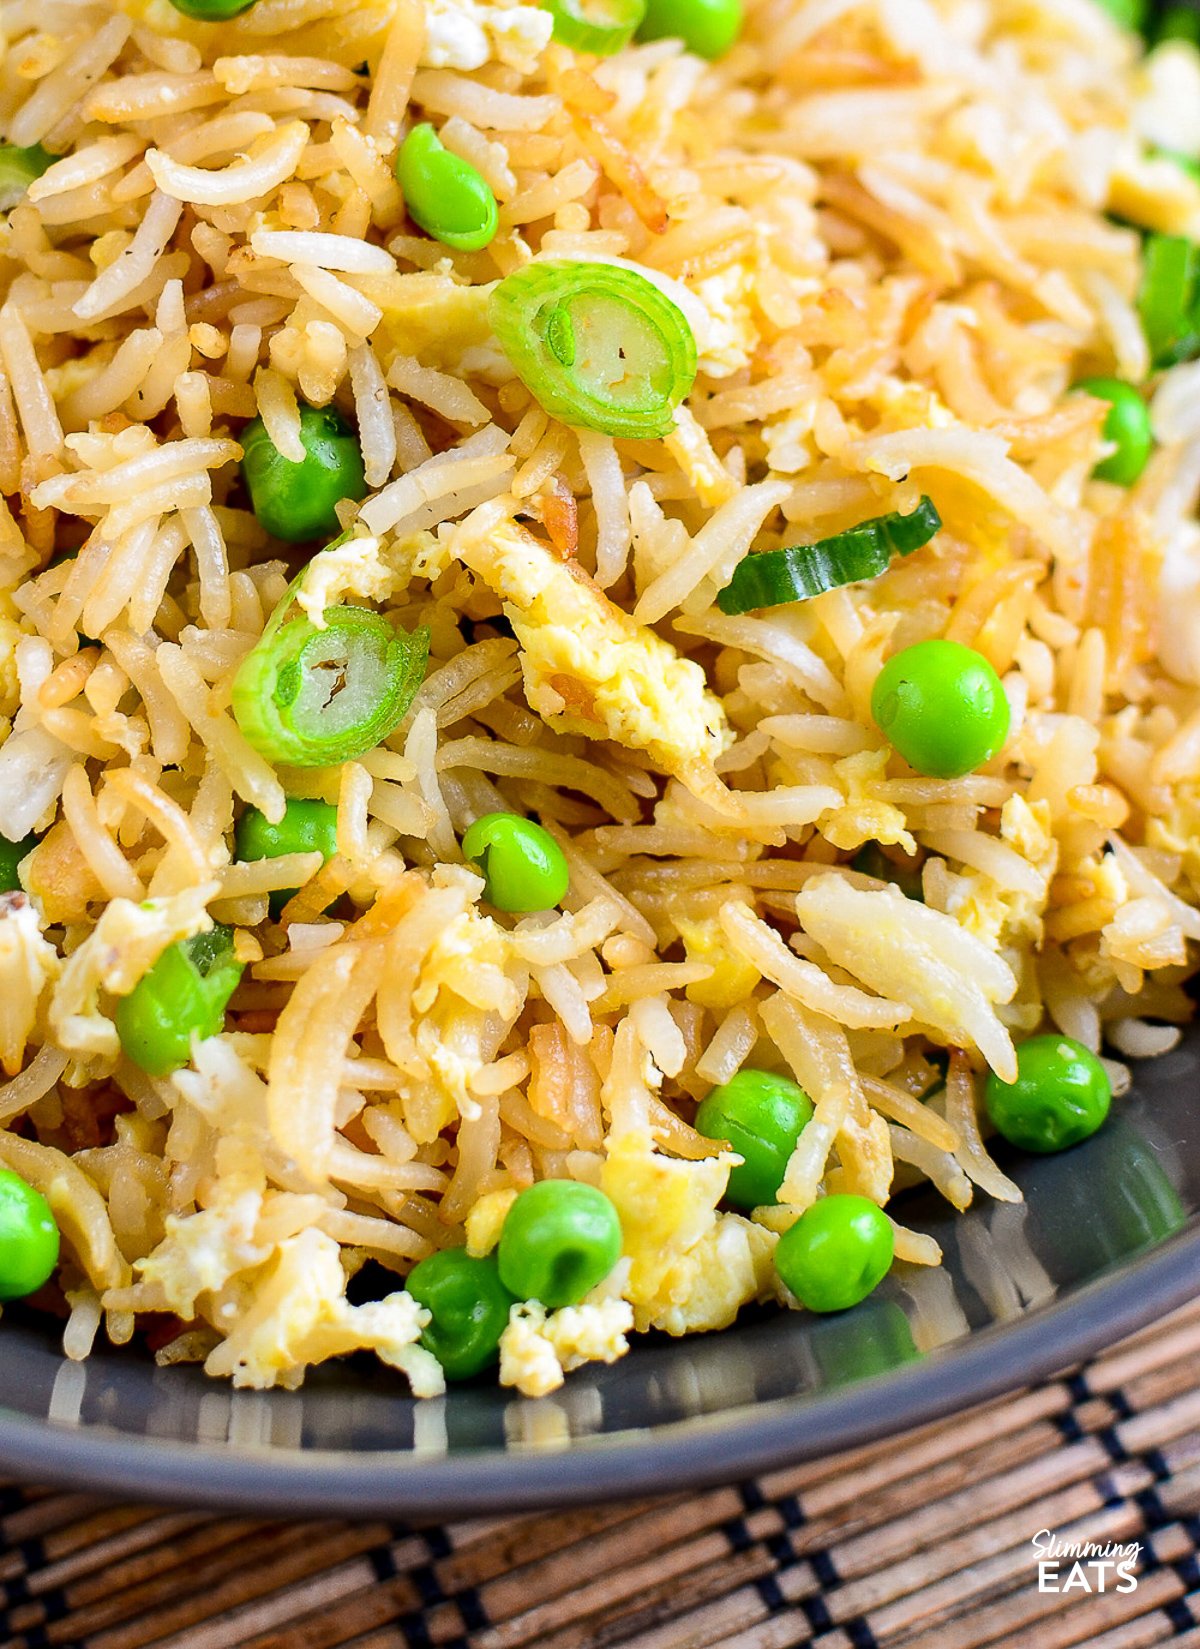 Perfect egg fried rice with peas and green onions in a bowl"